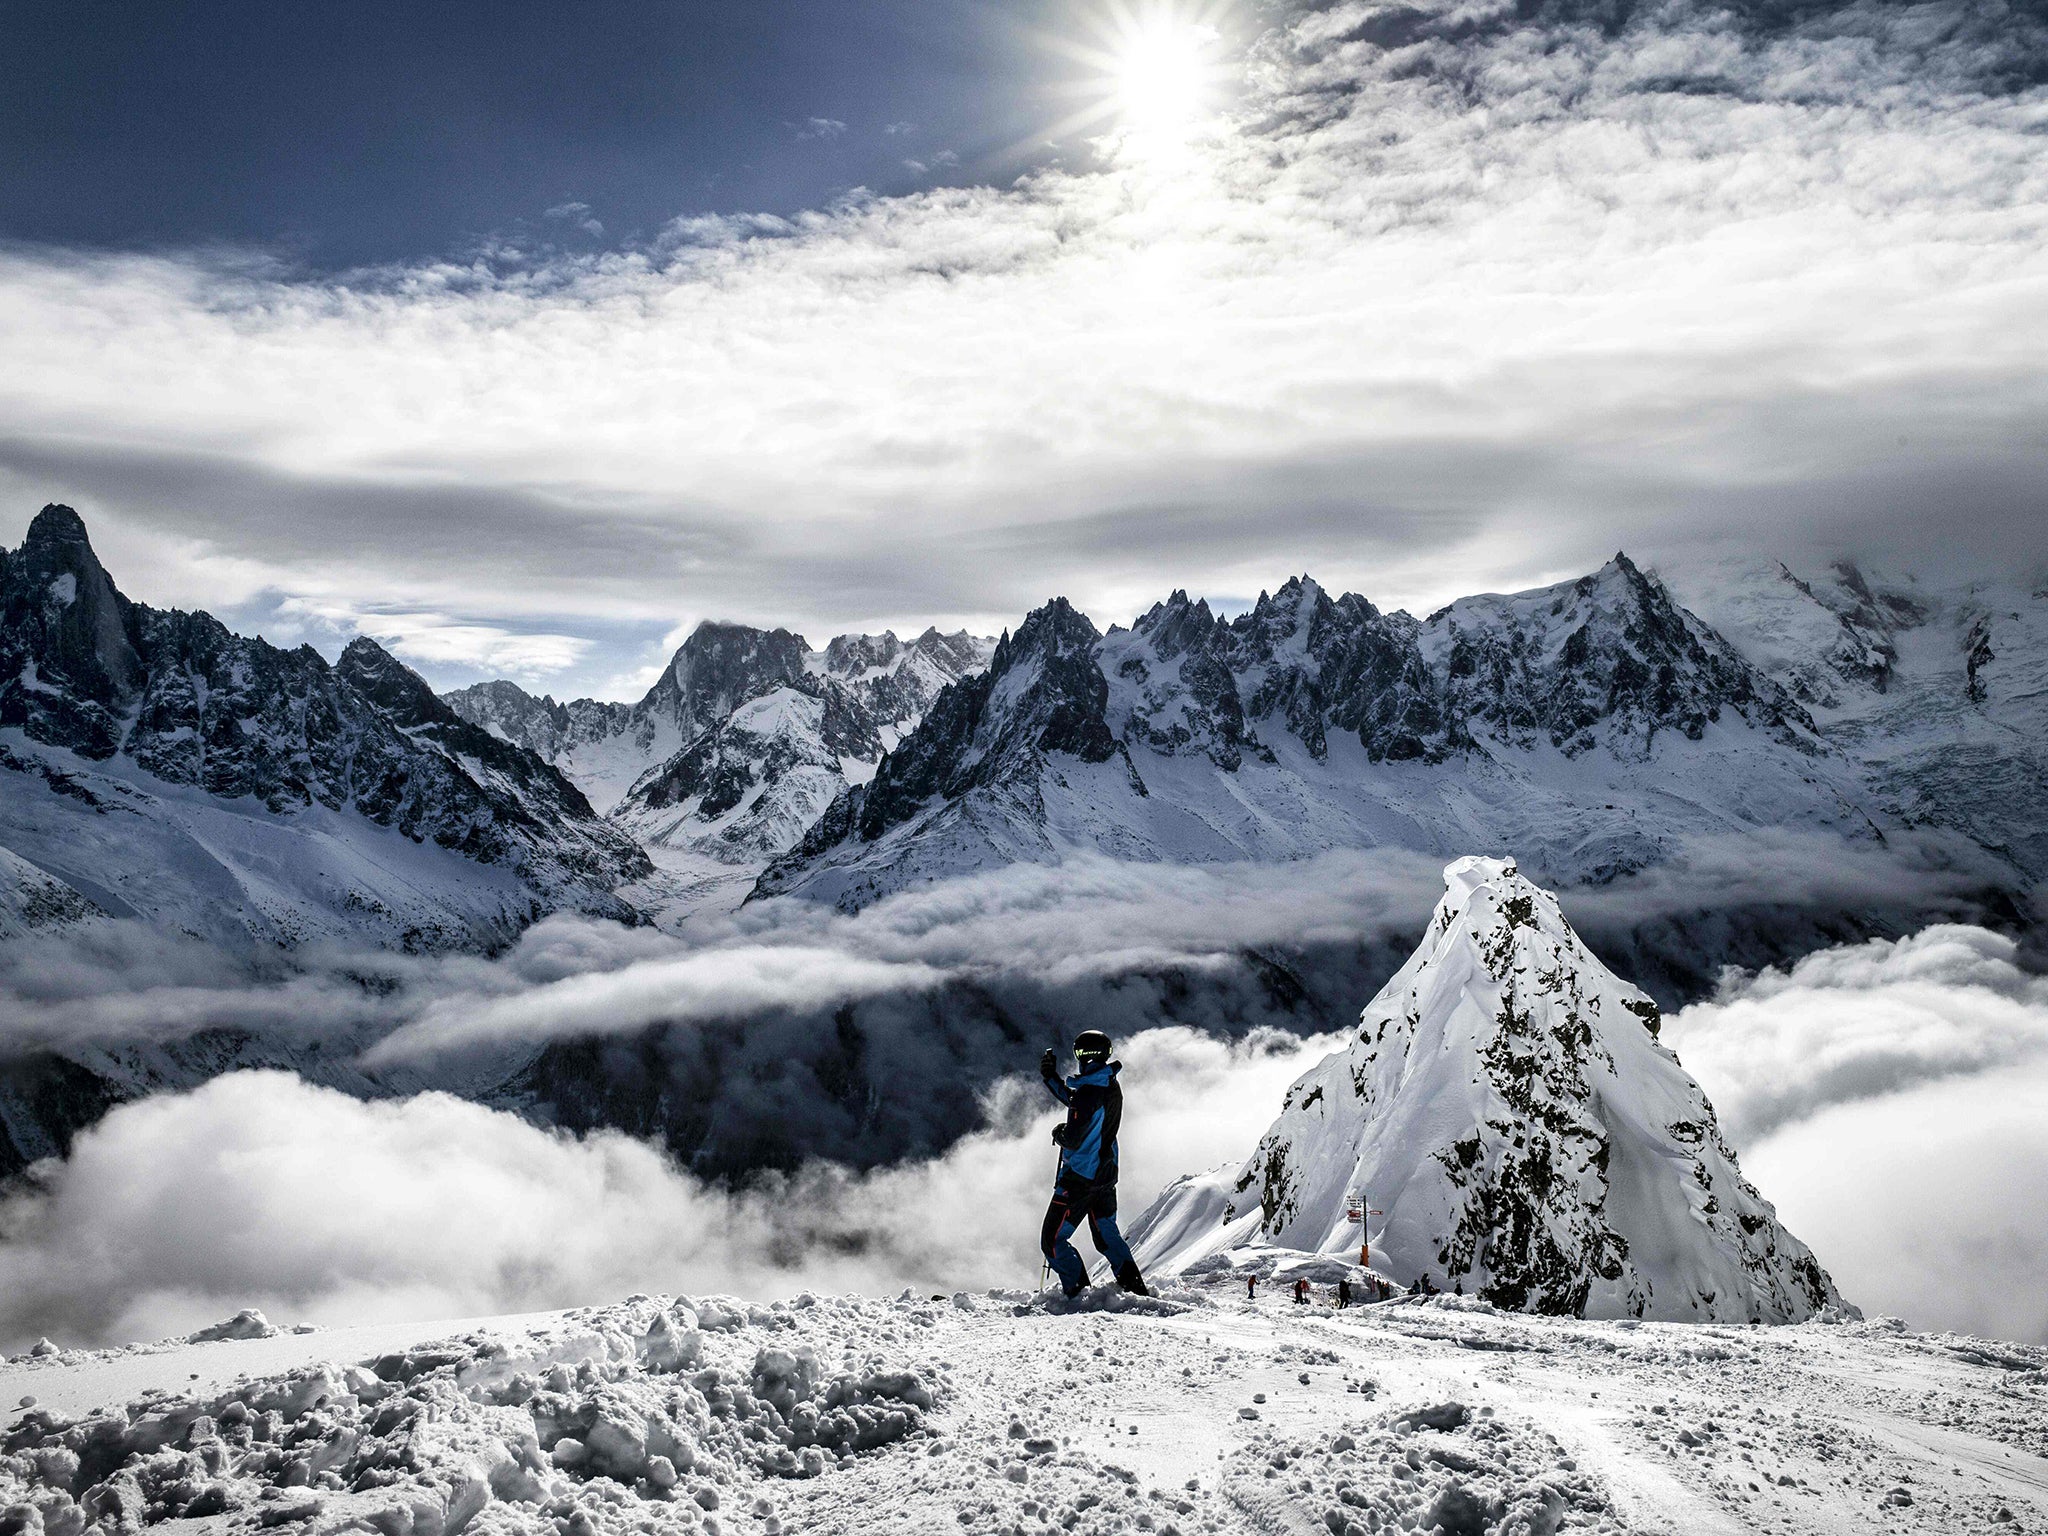 The Mont Blanc massif near Chamonix attracts hikers and skiers